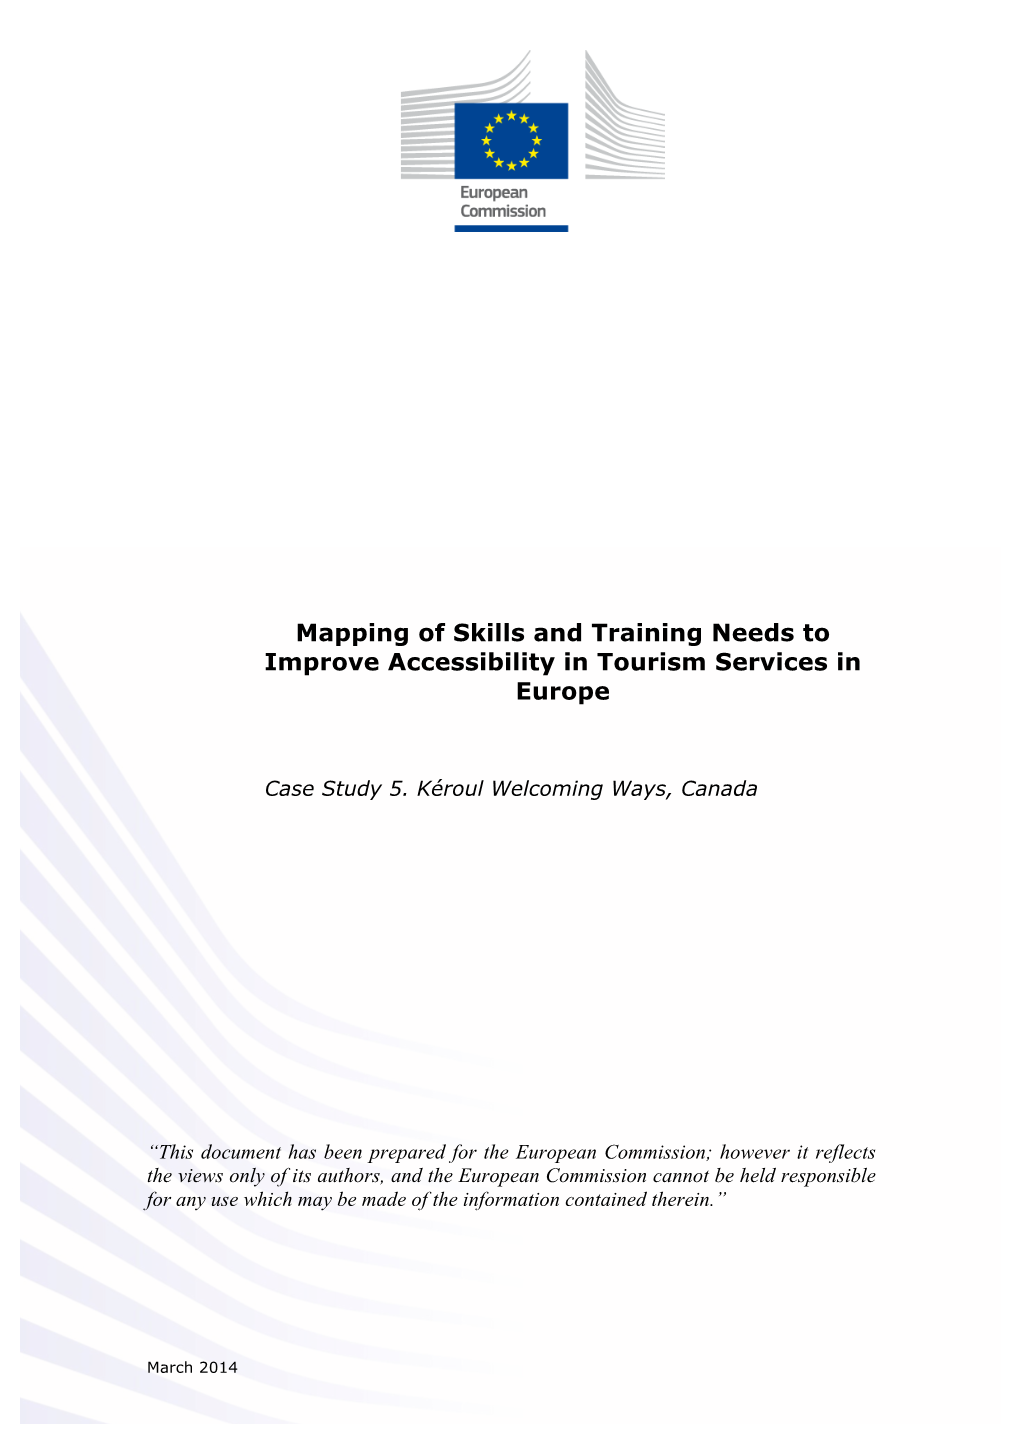 Mapping of Skills and Training Needs to Improve Accessibility in Tourism Services in Europe